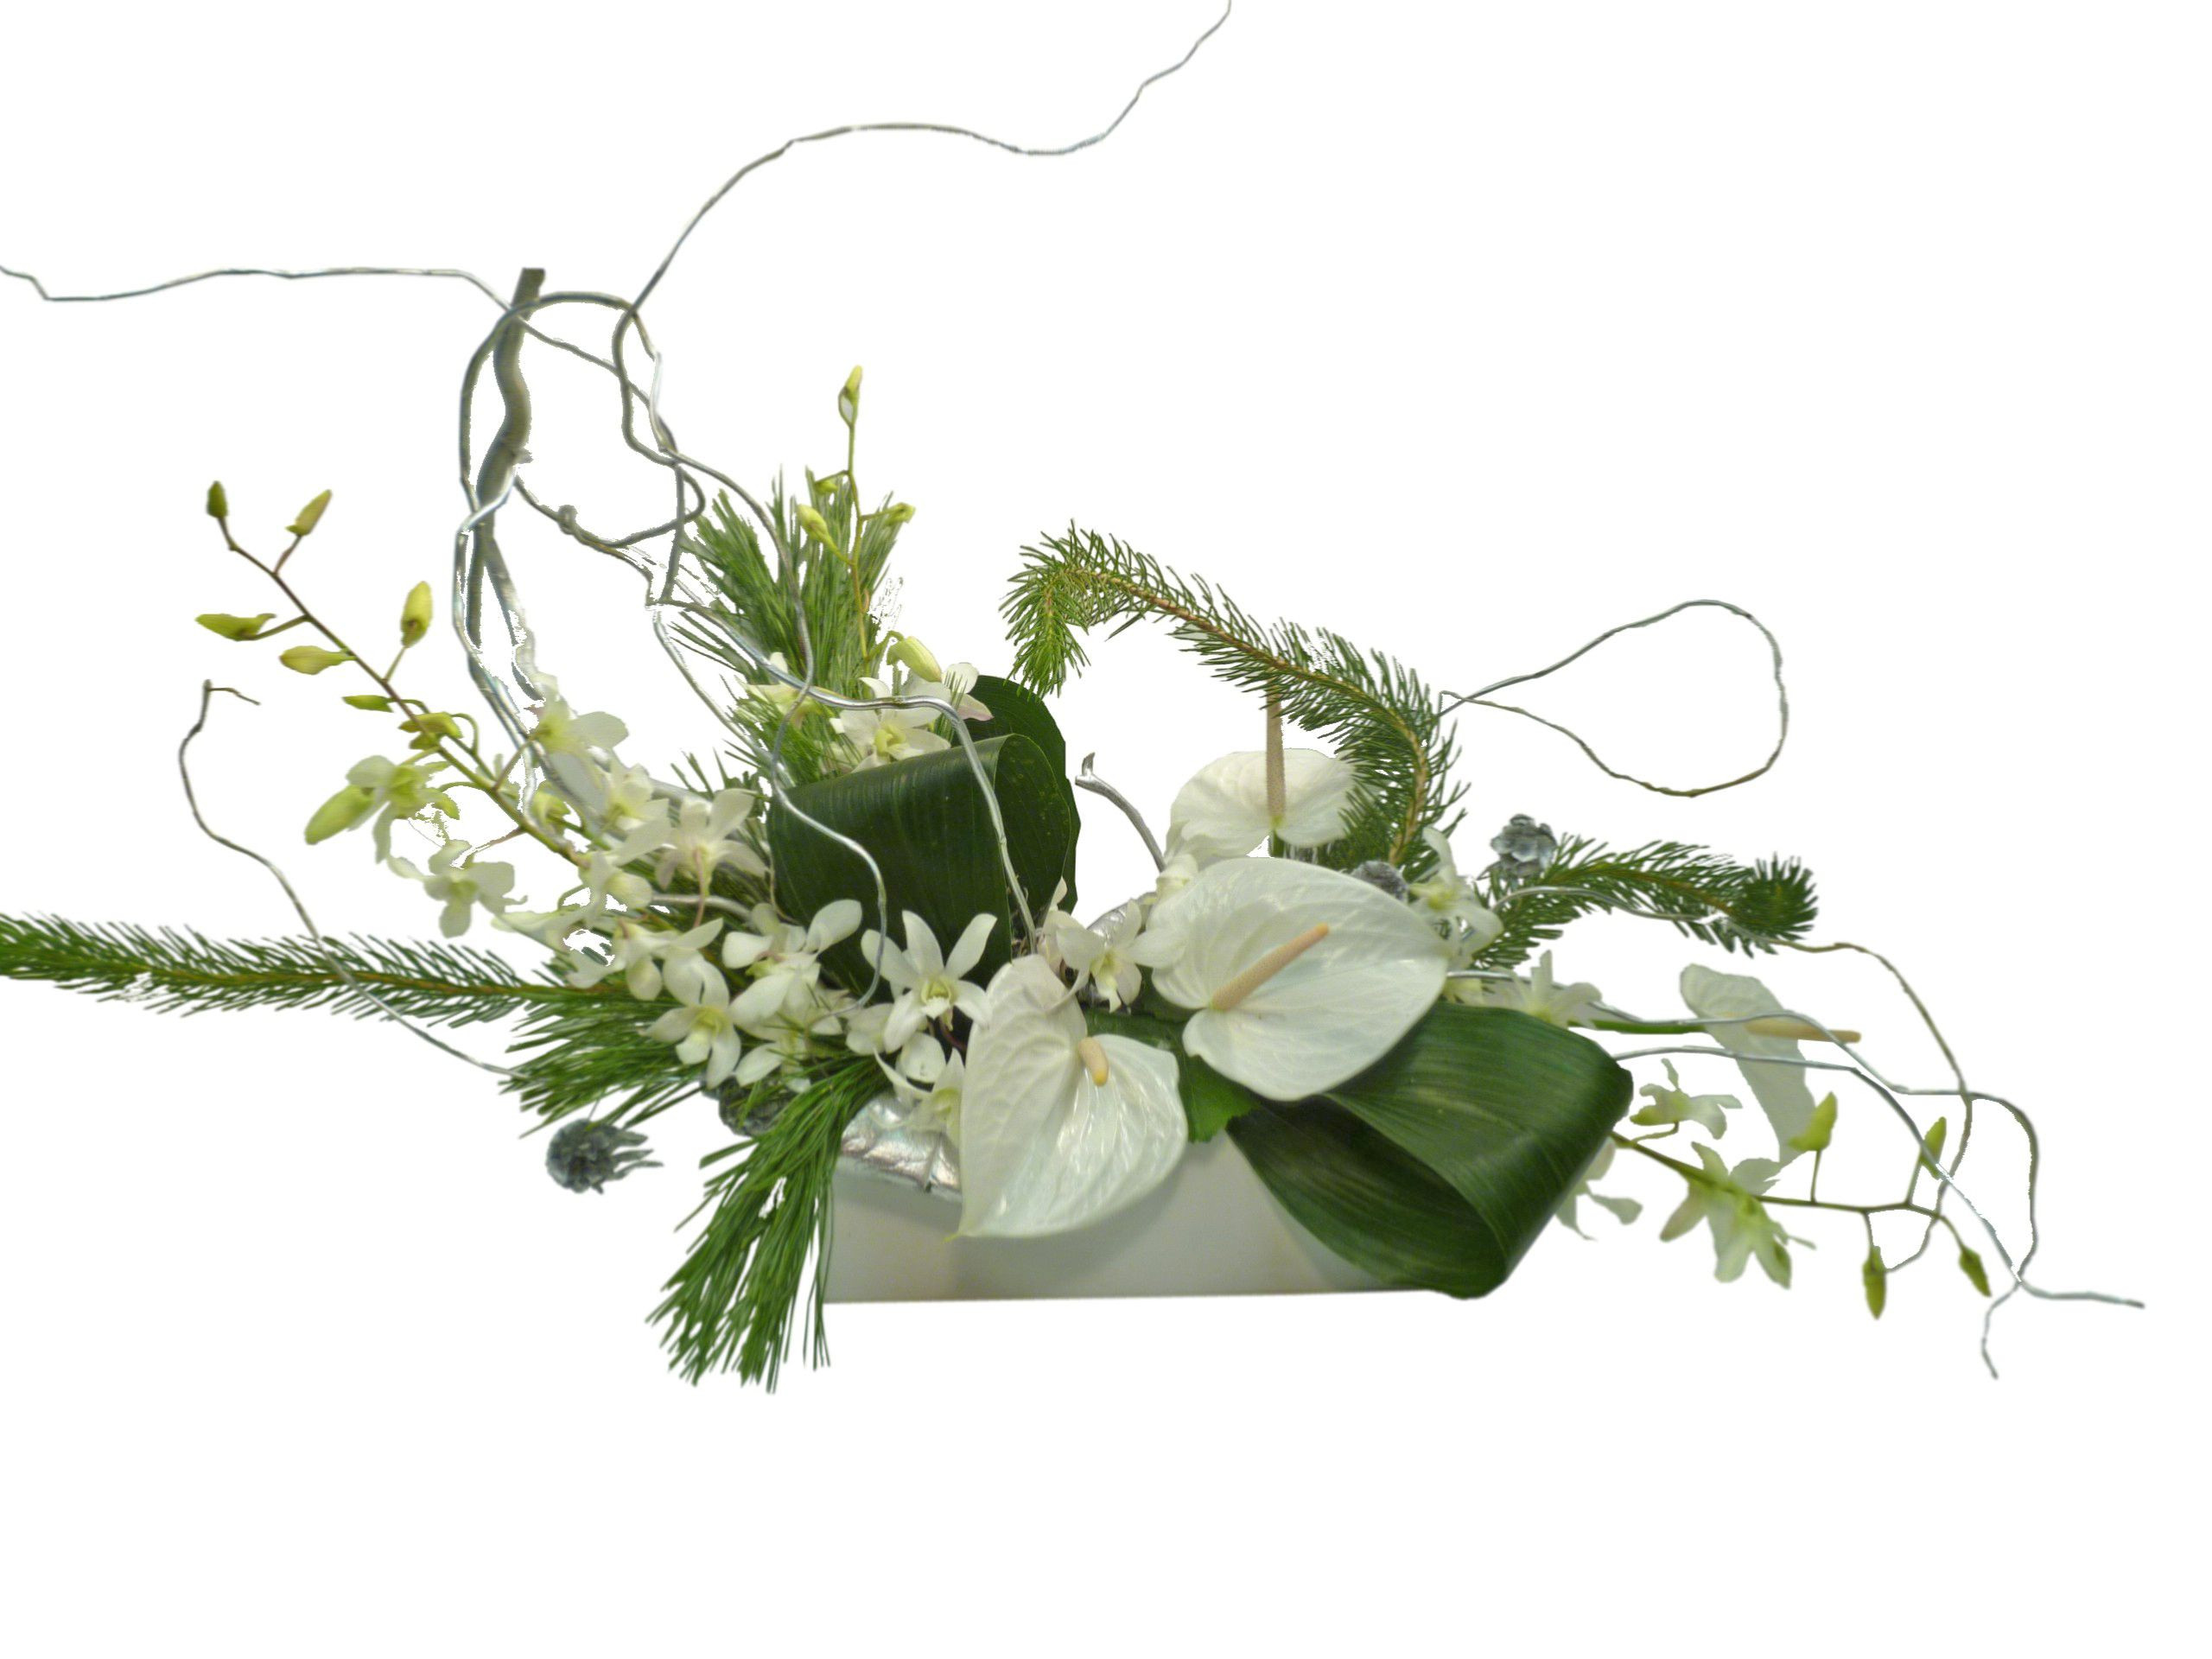 19 Lovable Tree Branch Vase 2022 free download tree branch vase of 31 modern vase and gift the weekly world in flower arrangements ideas modern flowers healthy